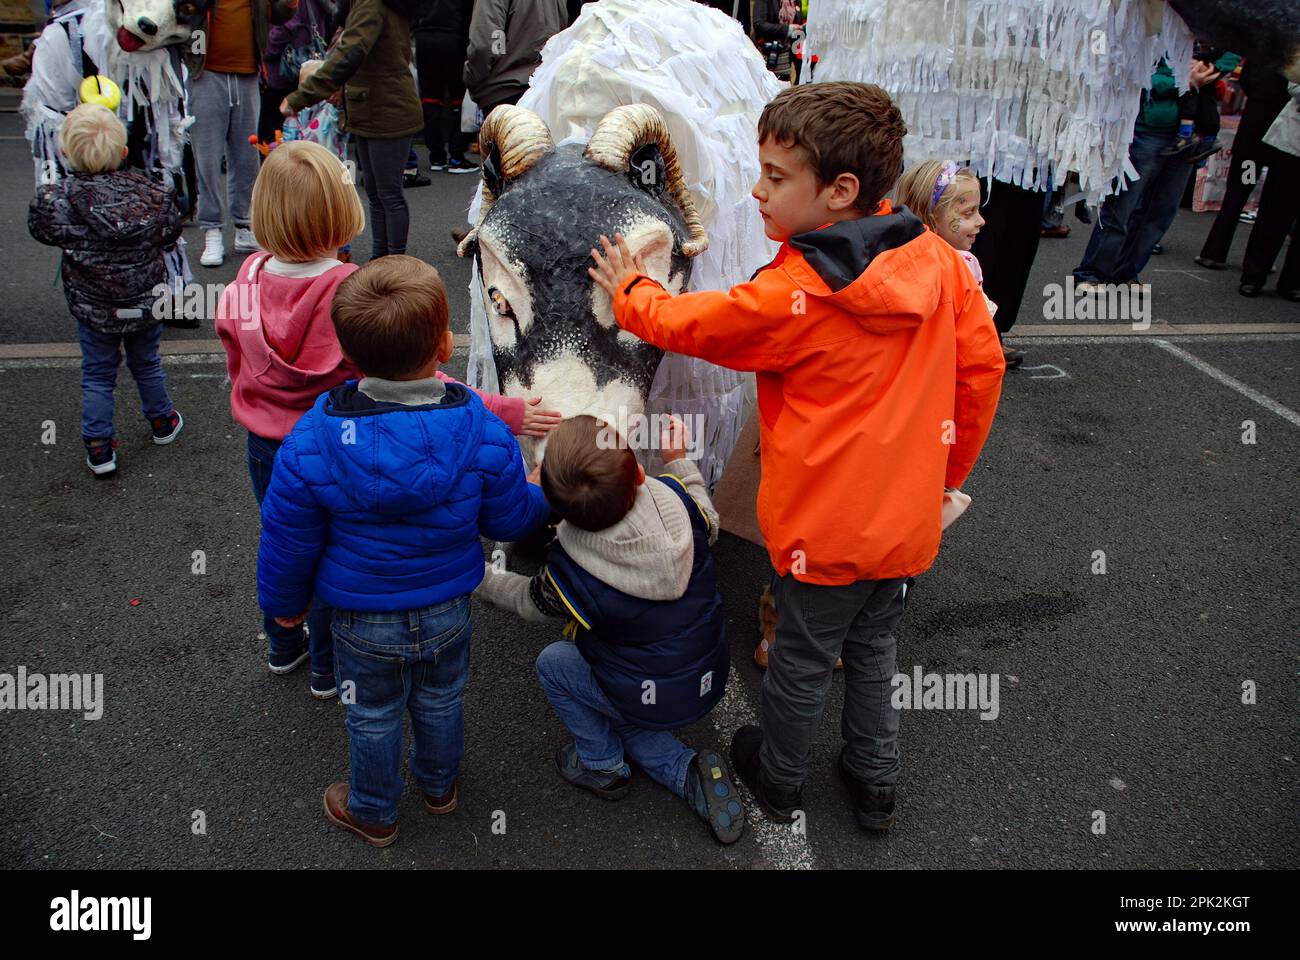 Adulation of the giant Swaledale sheep by children attending the Skipton Puppet festival (approximately 2015 in North Yorkshire, UK) Stock Photo